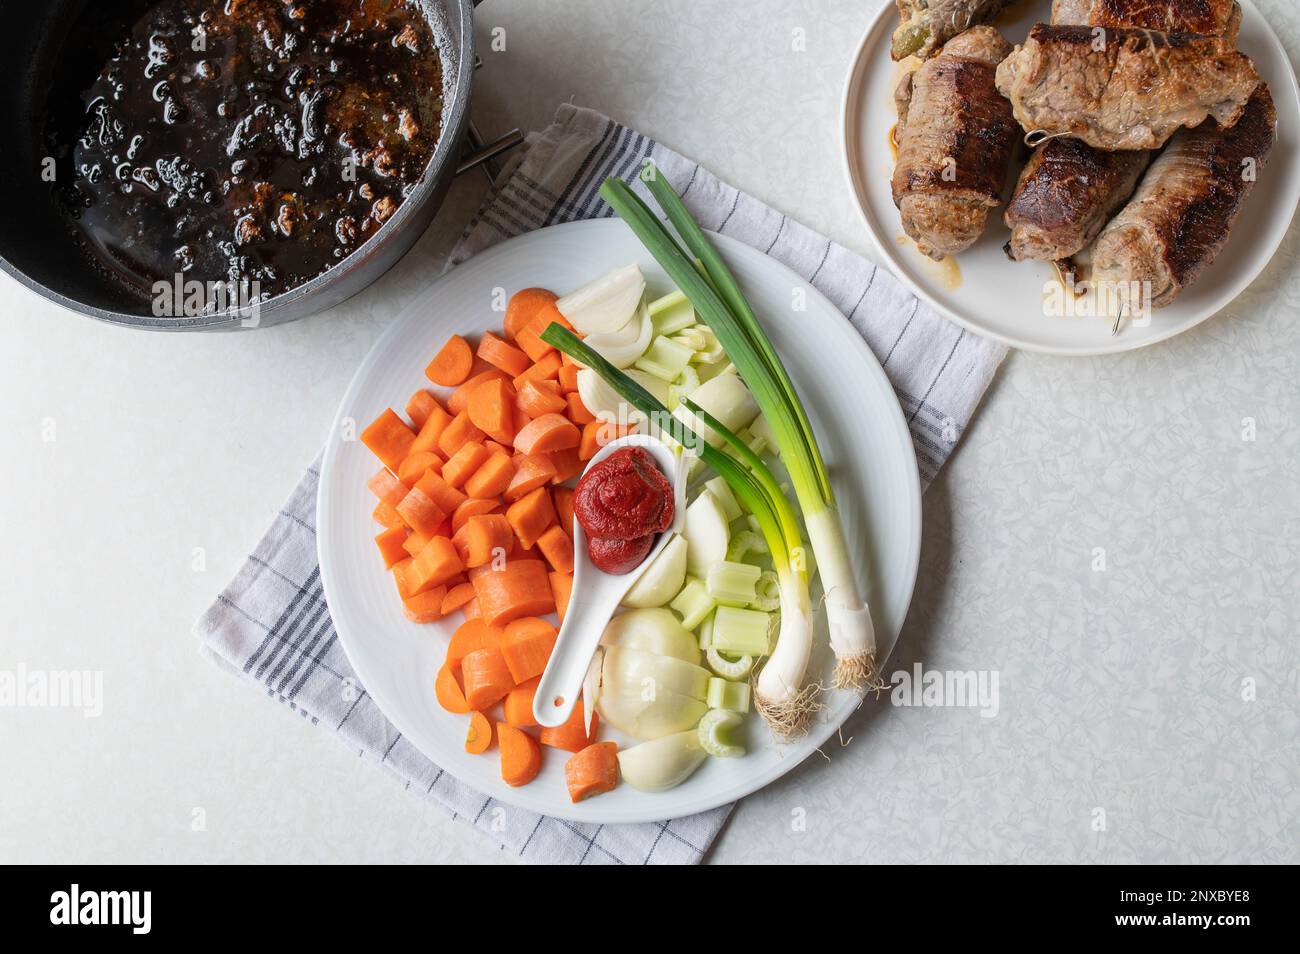 Beef roulades cooking, making prepartion. Mirepoix or chopped root vegetables for making gravy. Part of a series Stock Photo